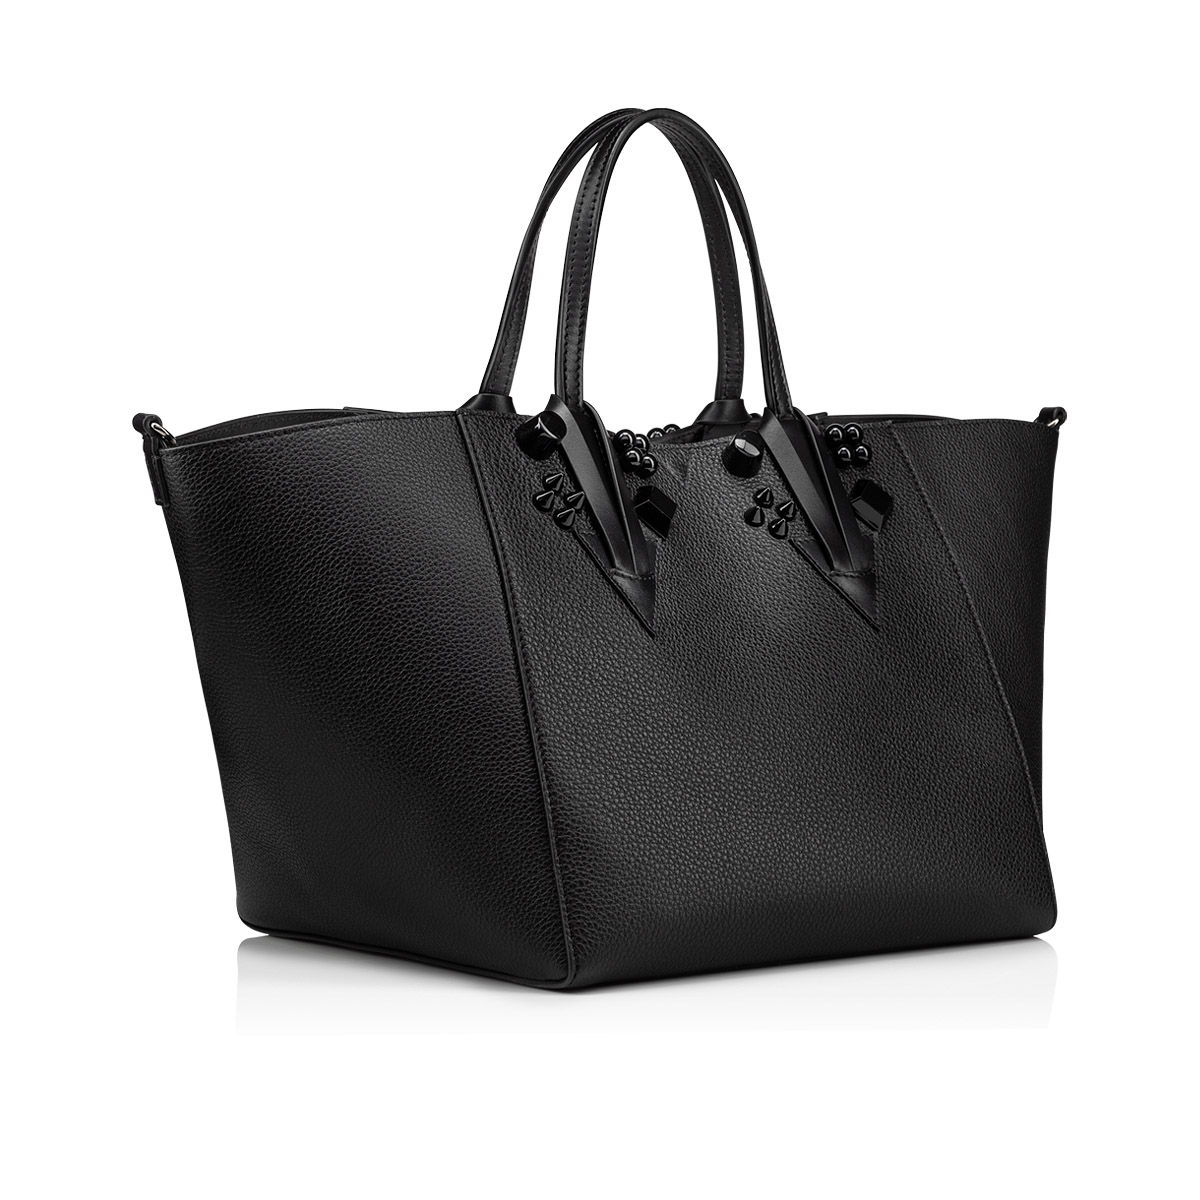 Cabachic small - Tote bag - Grained calf leather and spikes Couronnes -  Black - Christian Louboutin